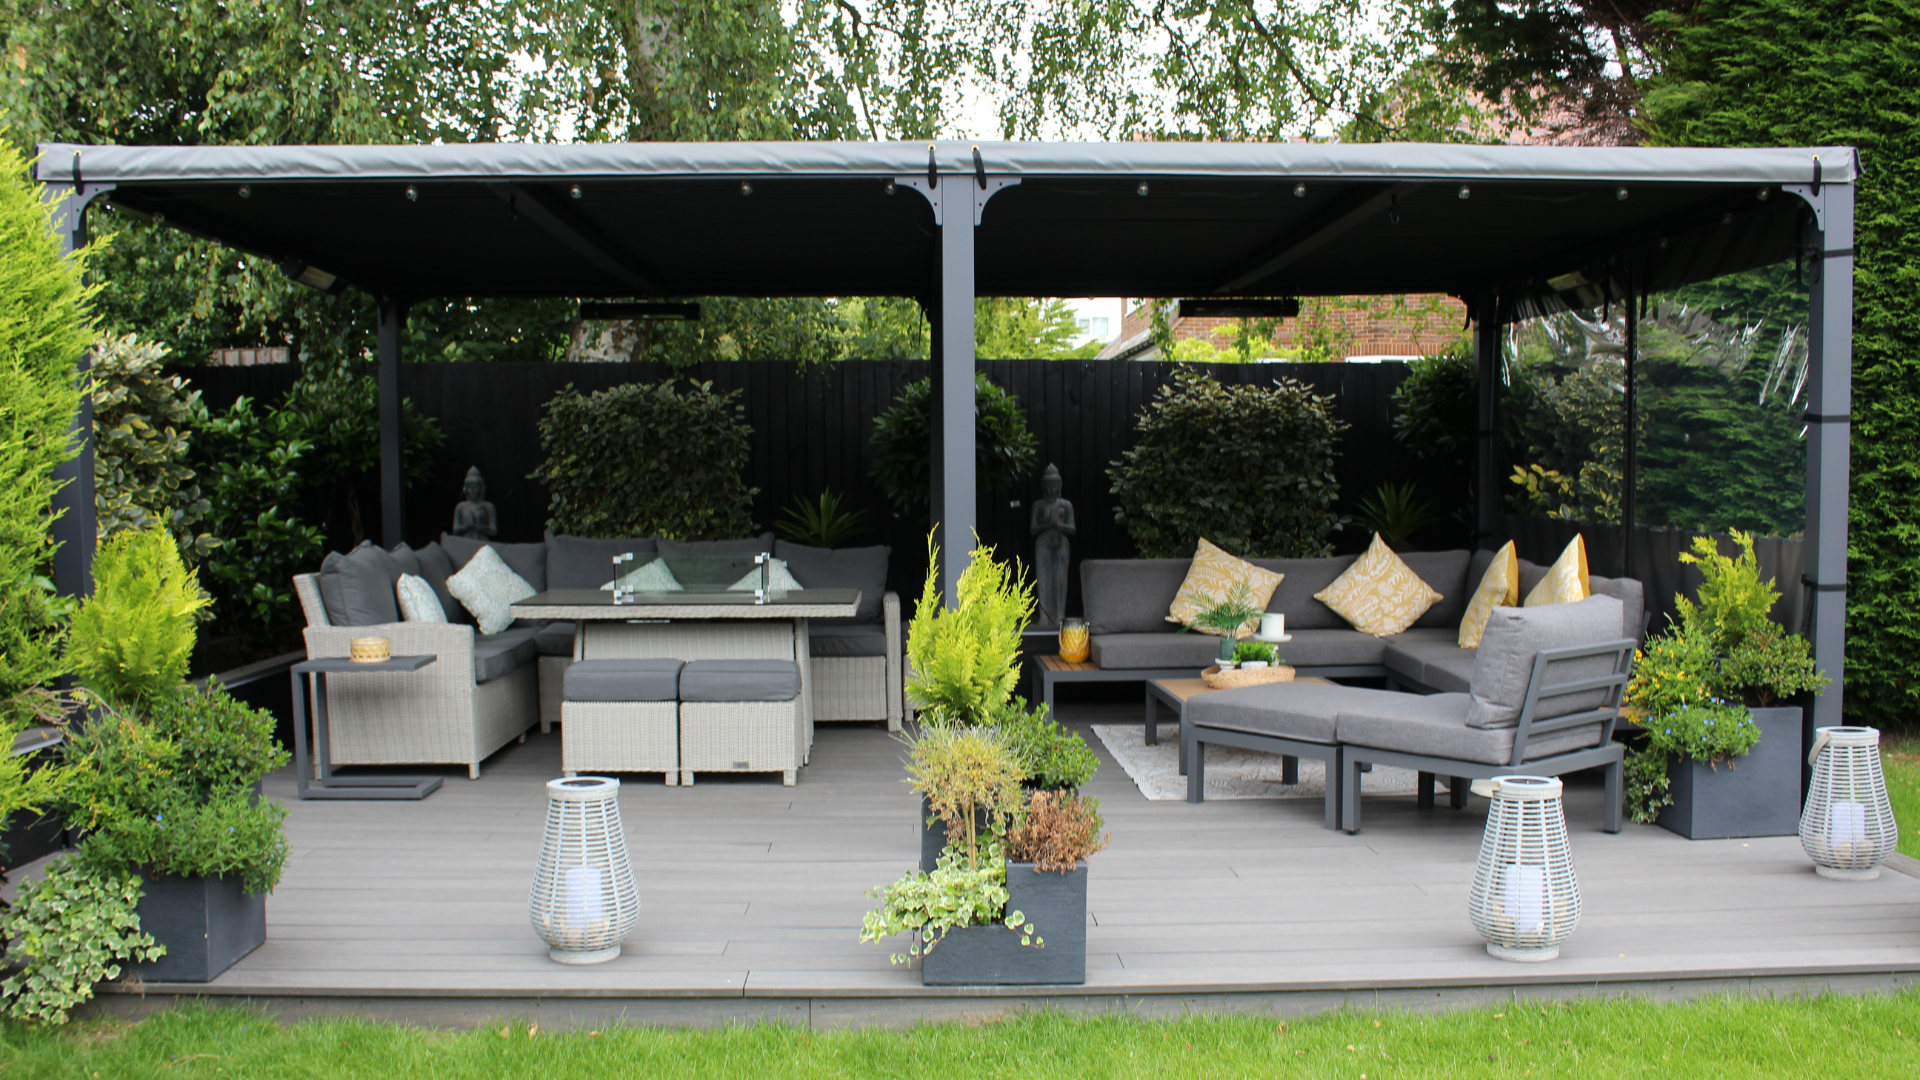 Wirral Landscapes for 'Best use of Composite Decking